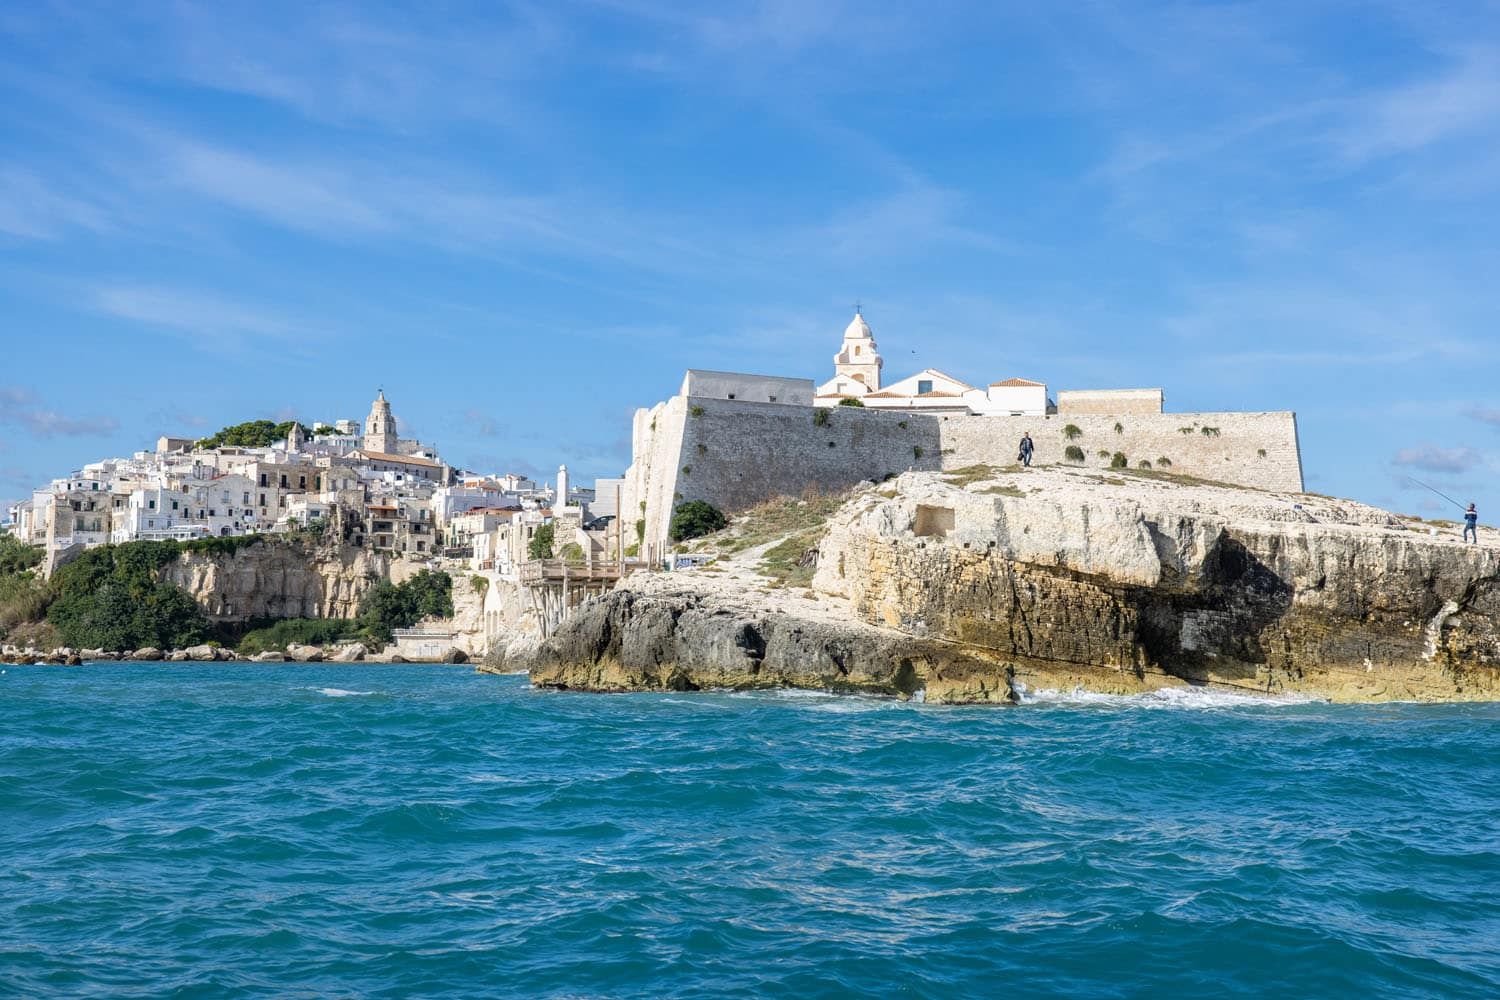 Vieste from the Sea